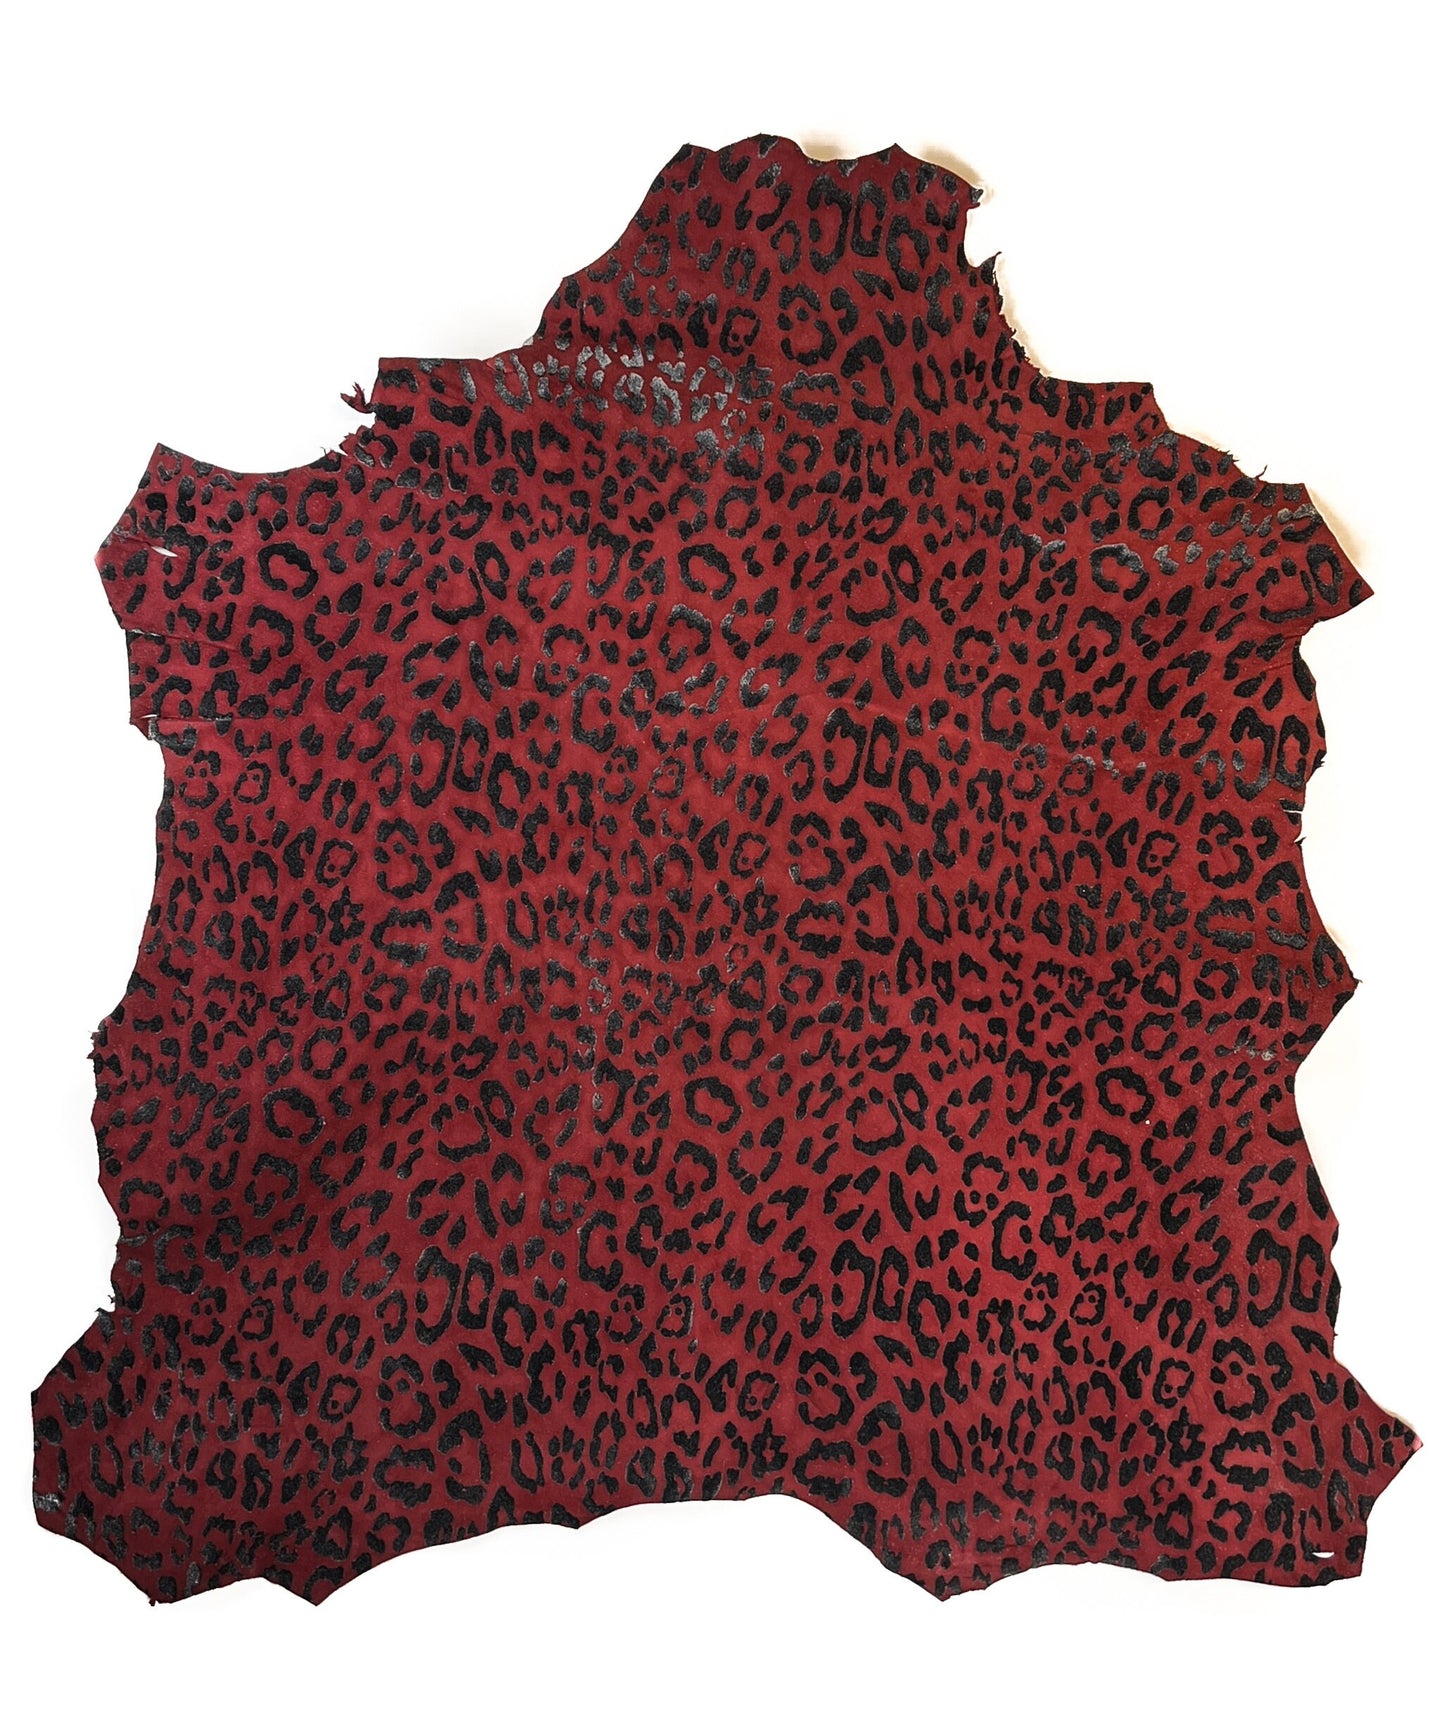 Red Black Lambskin Suede With Leopard Print 0.8-1.2mm/2-3oz